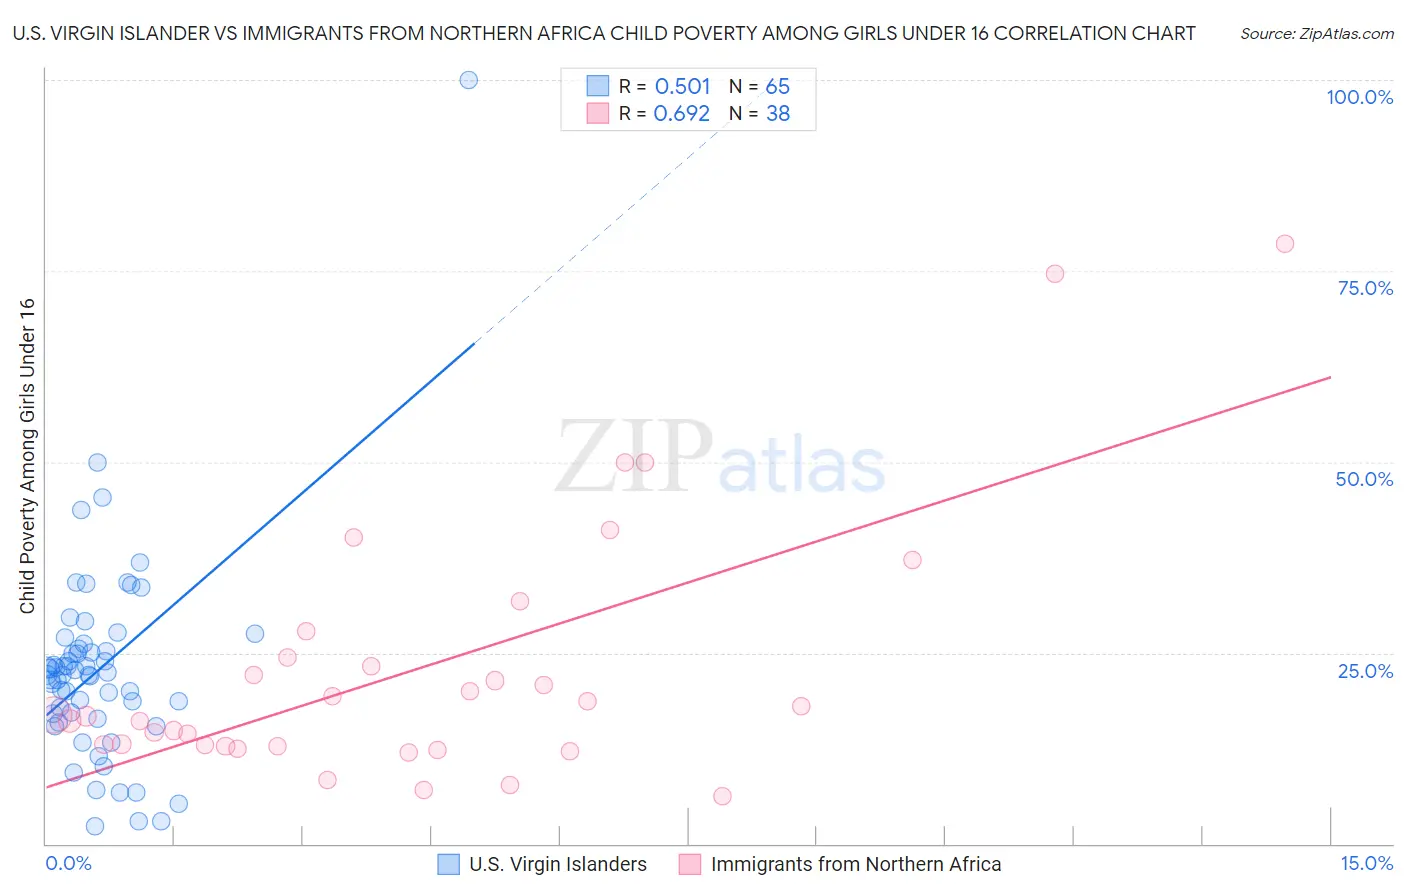 U.S. Virgin Islander vs Immigrants from Northern Africa Child Poverty Among Girls Under 16